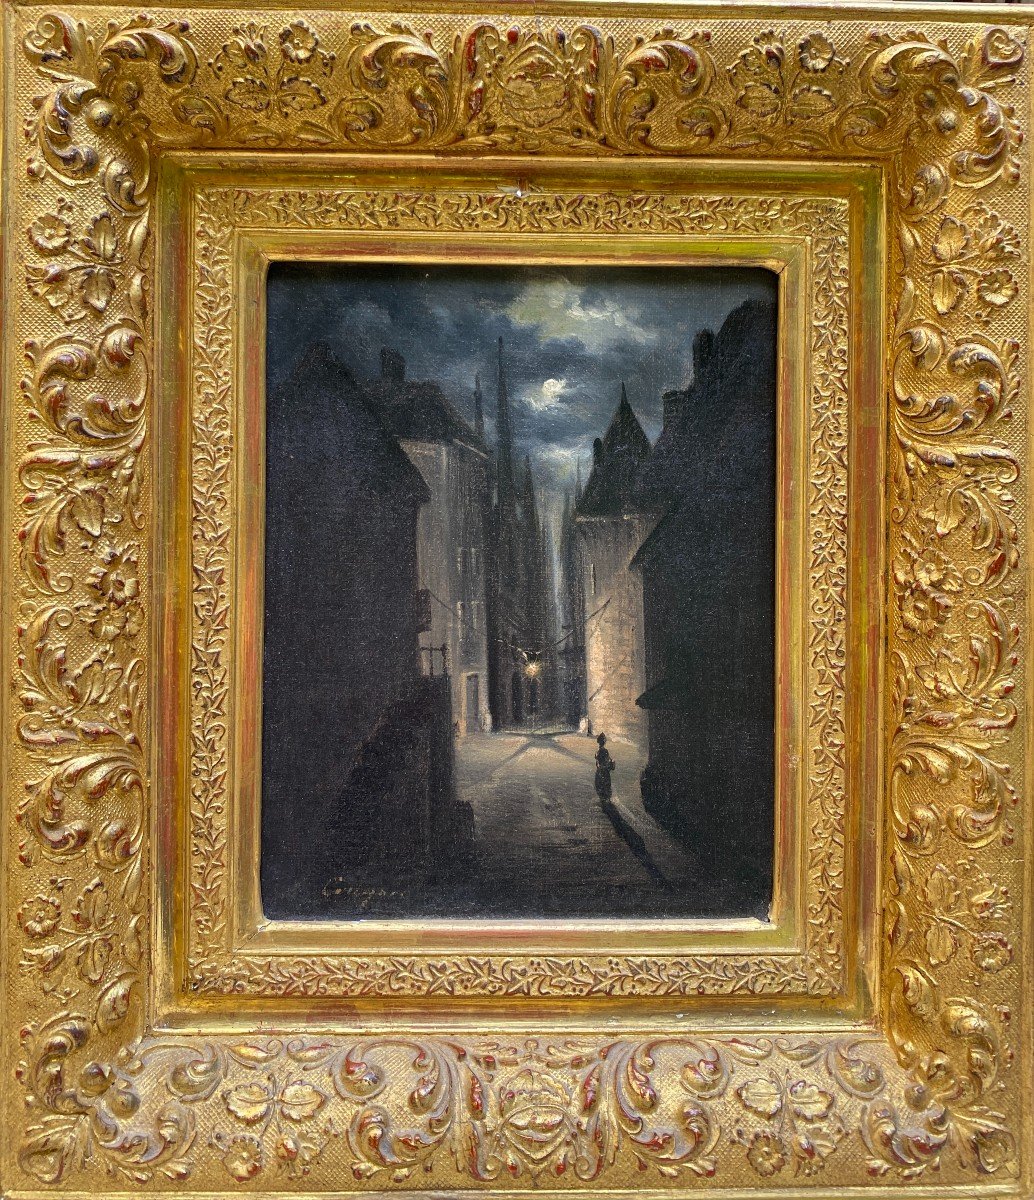 French School Of The End Of The 19th Century - Alone In The Street, At Night - Signed (to Decipher)